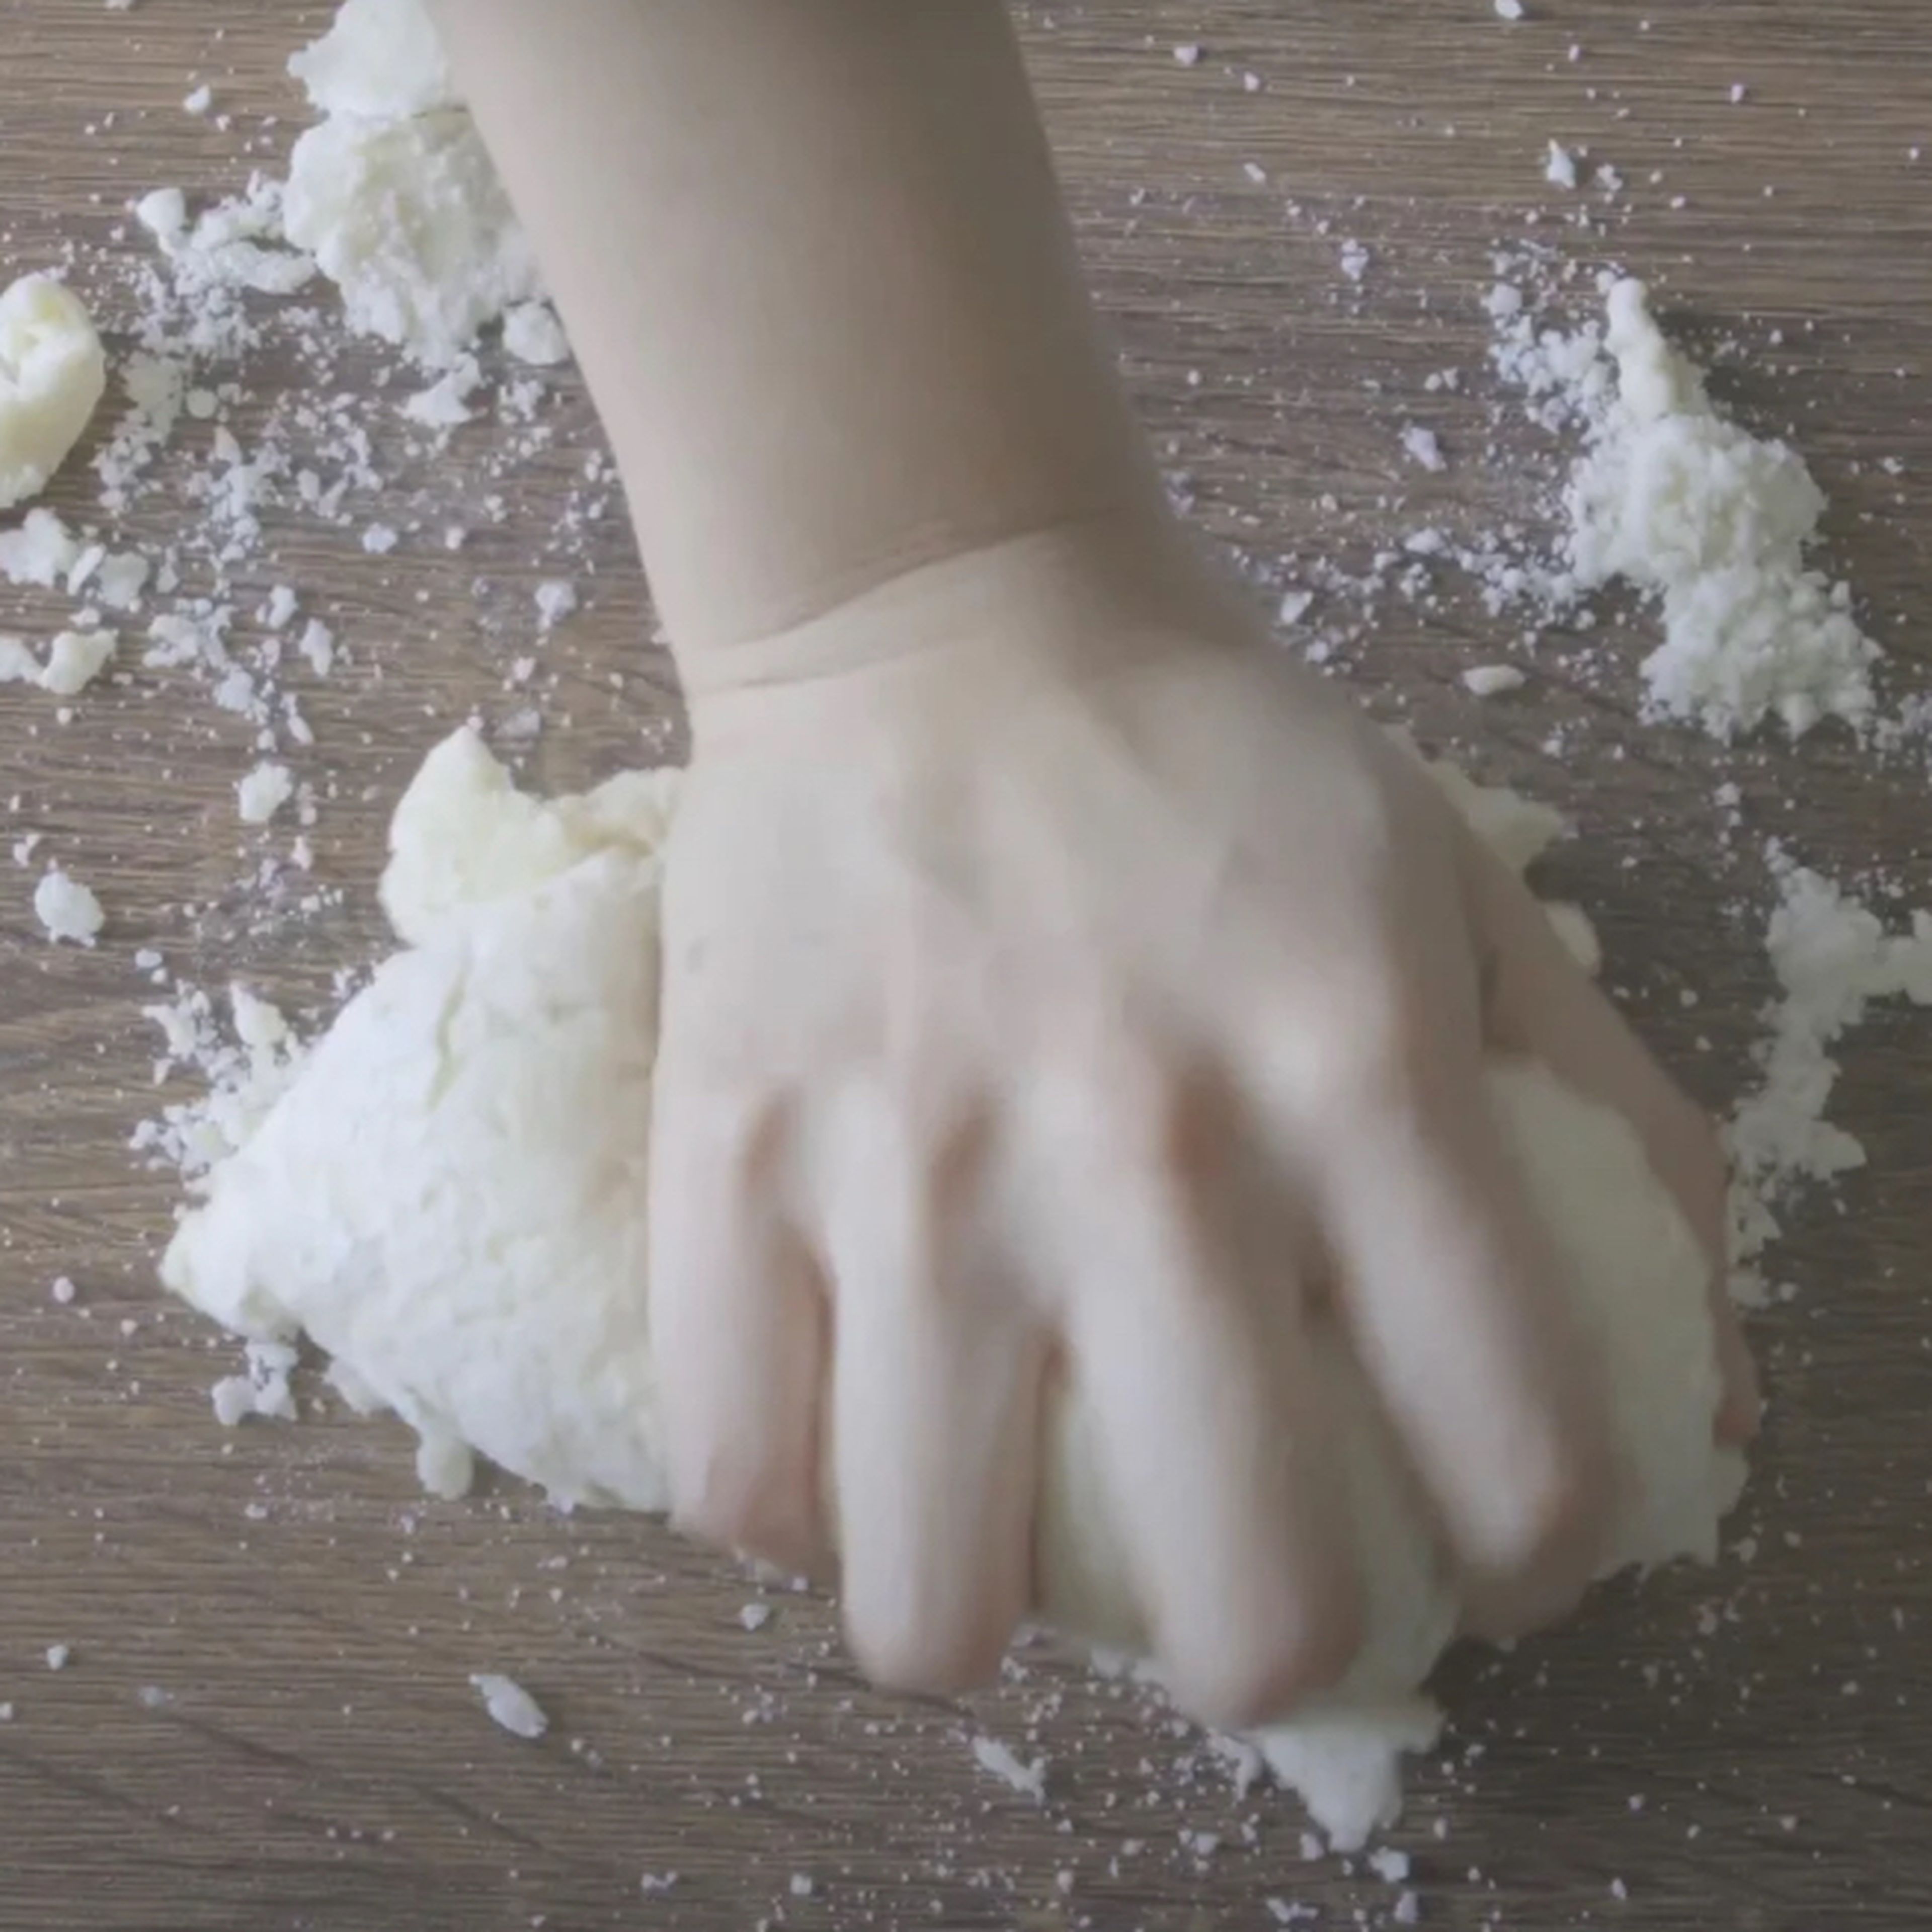 Use hand to combine the dough. Do this quickly so butter doesn’t melt.